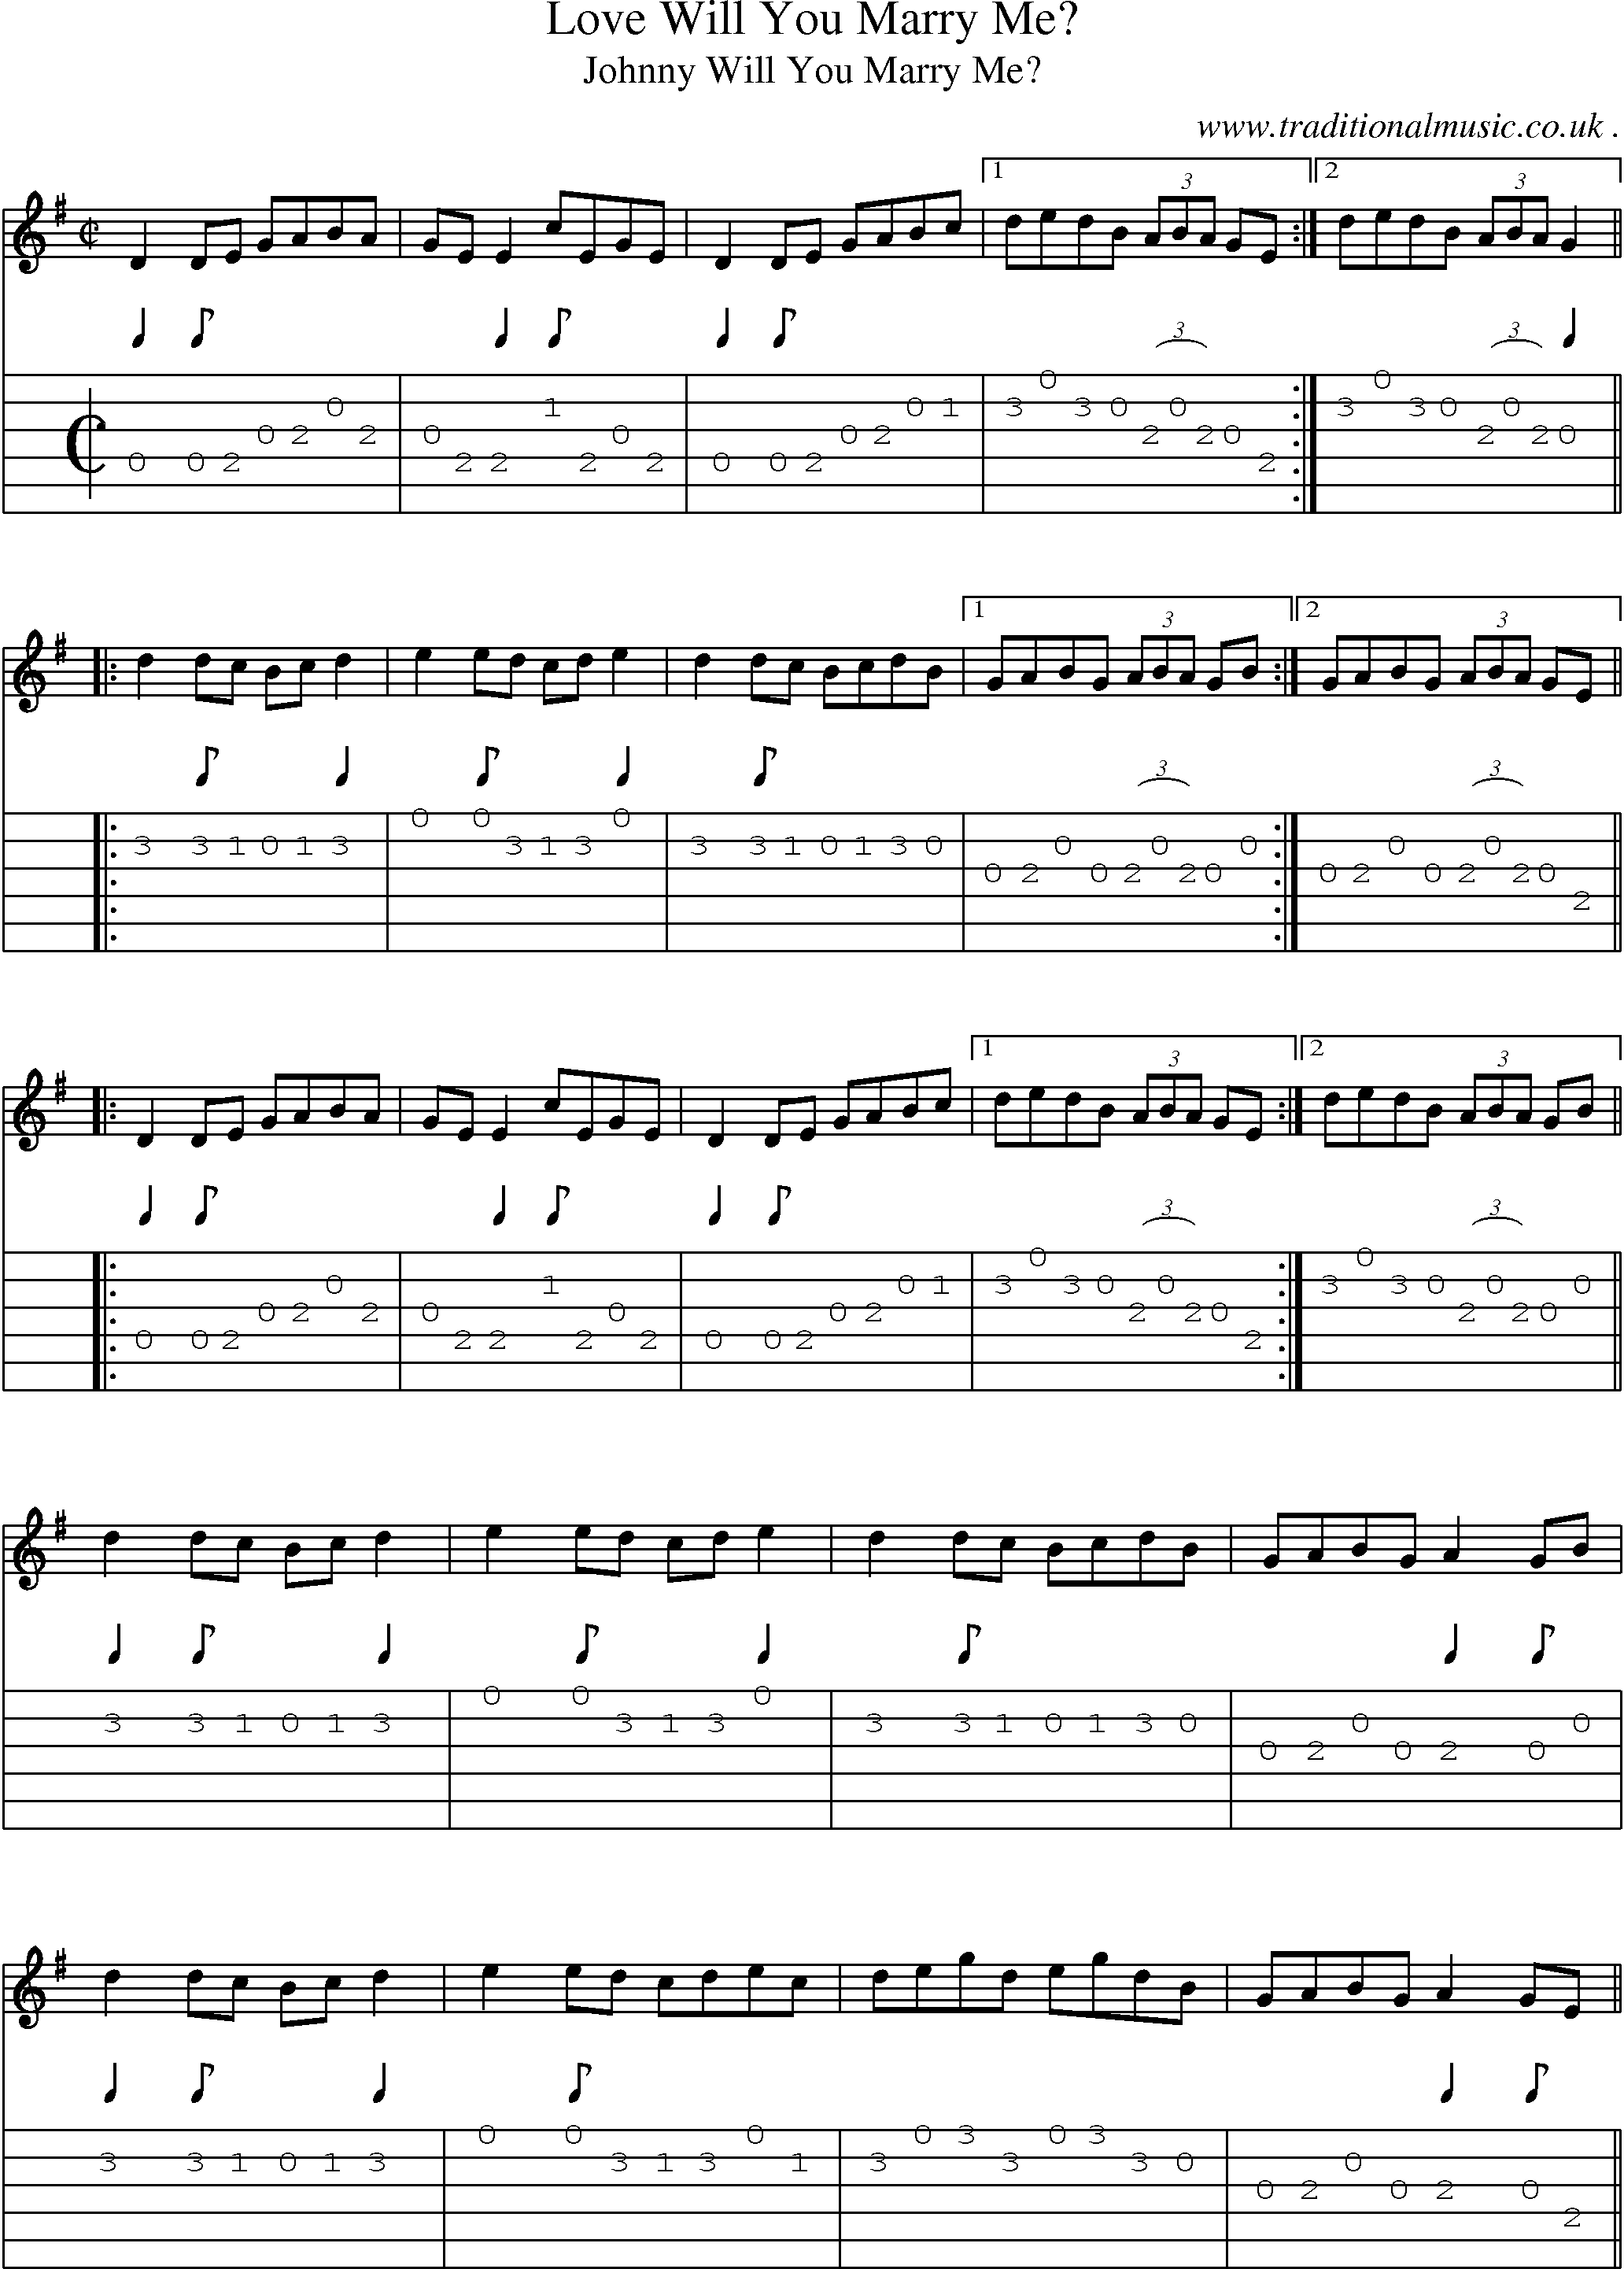 Sheet-Music and Guitar Tabs for Love Will You Marry Me